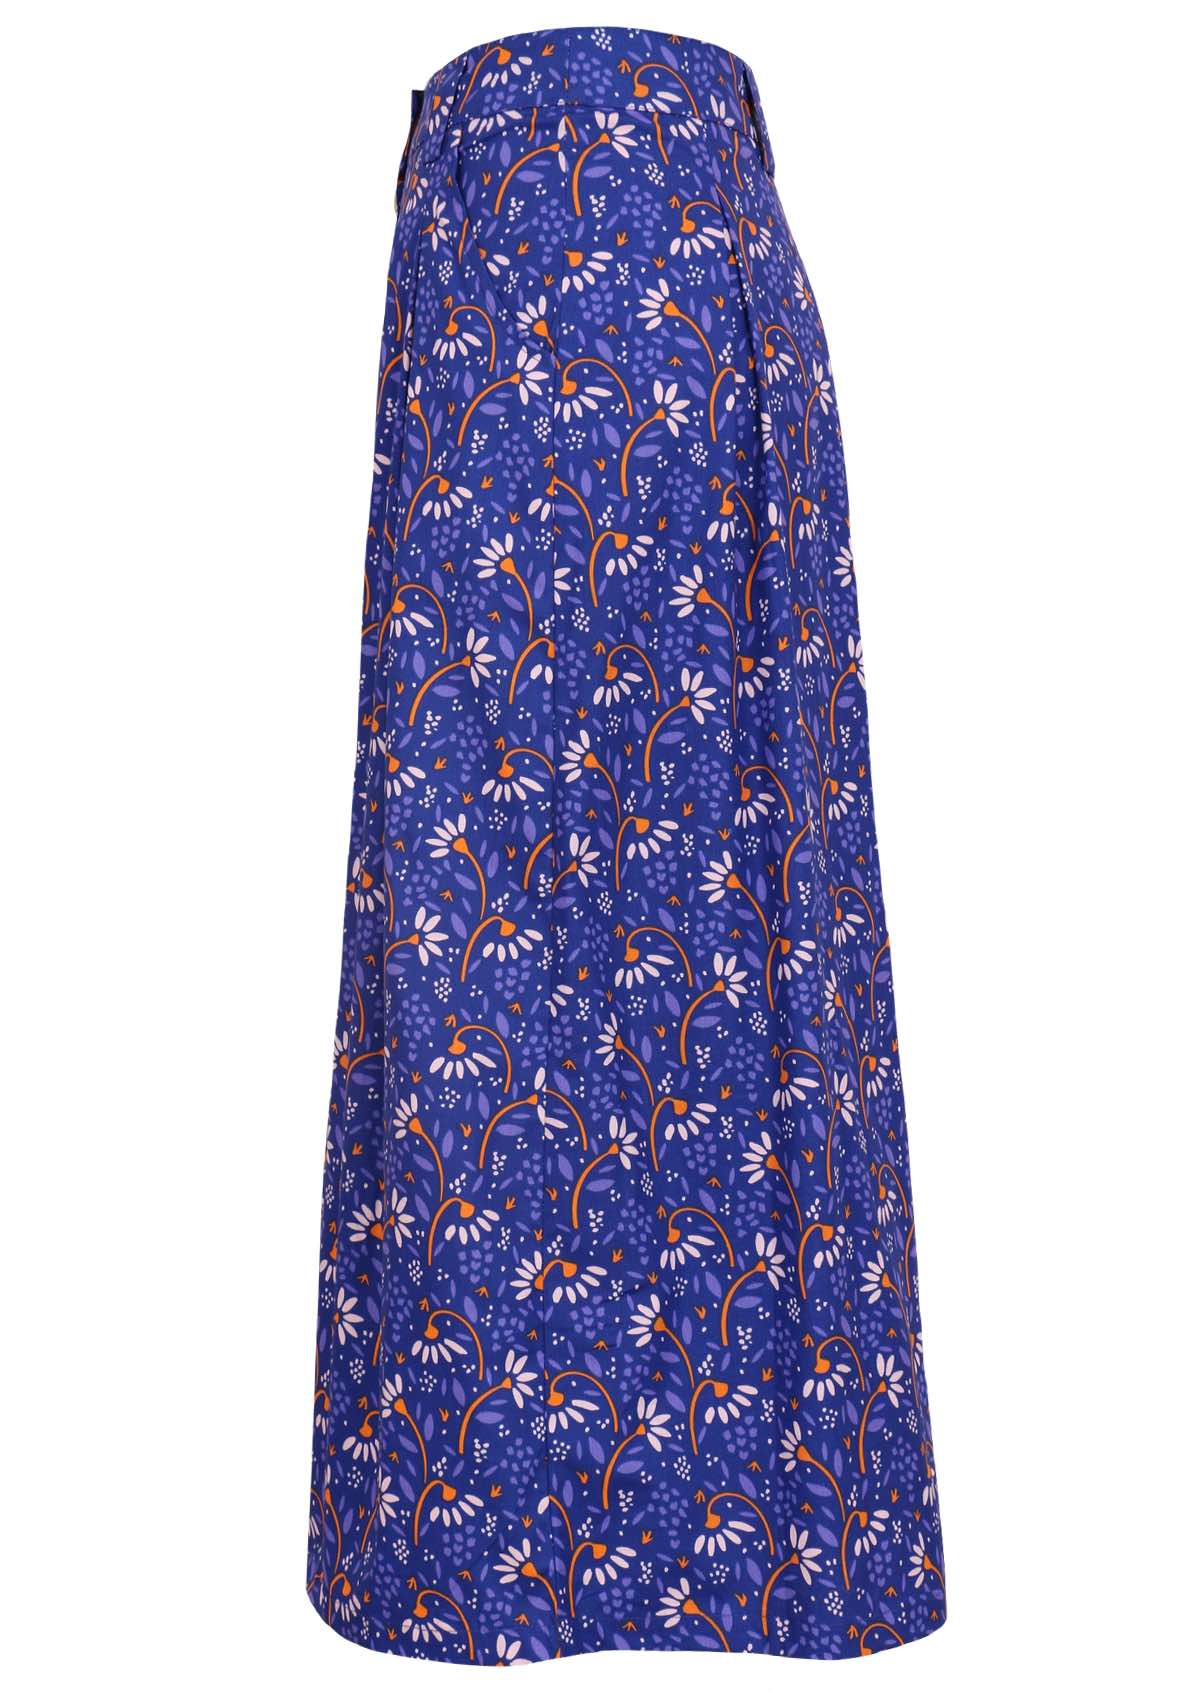 Blue based cotton skirt features a daisy pattern with hints of orange and off white. 